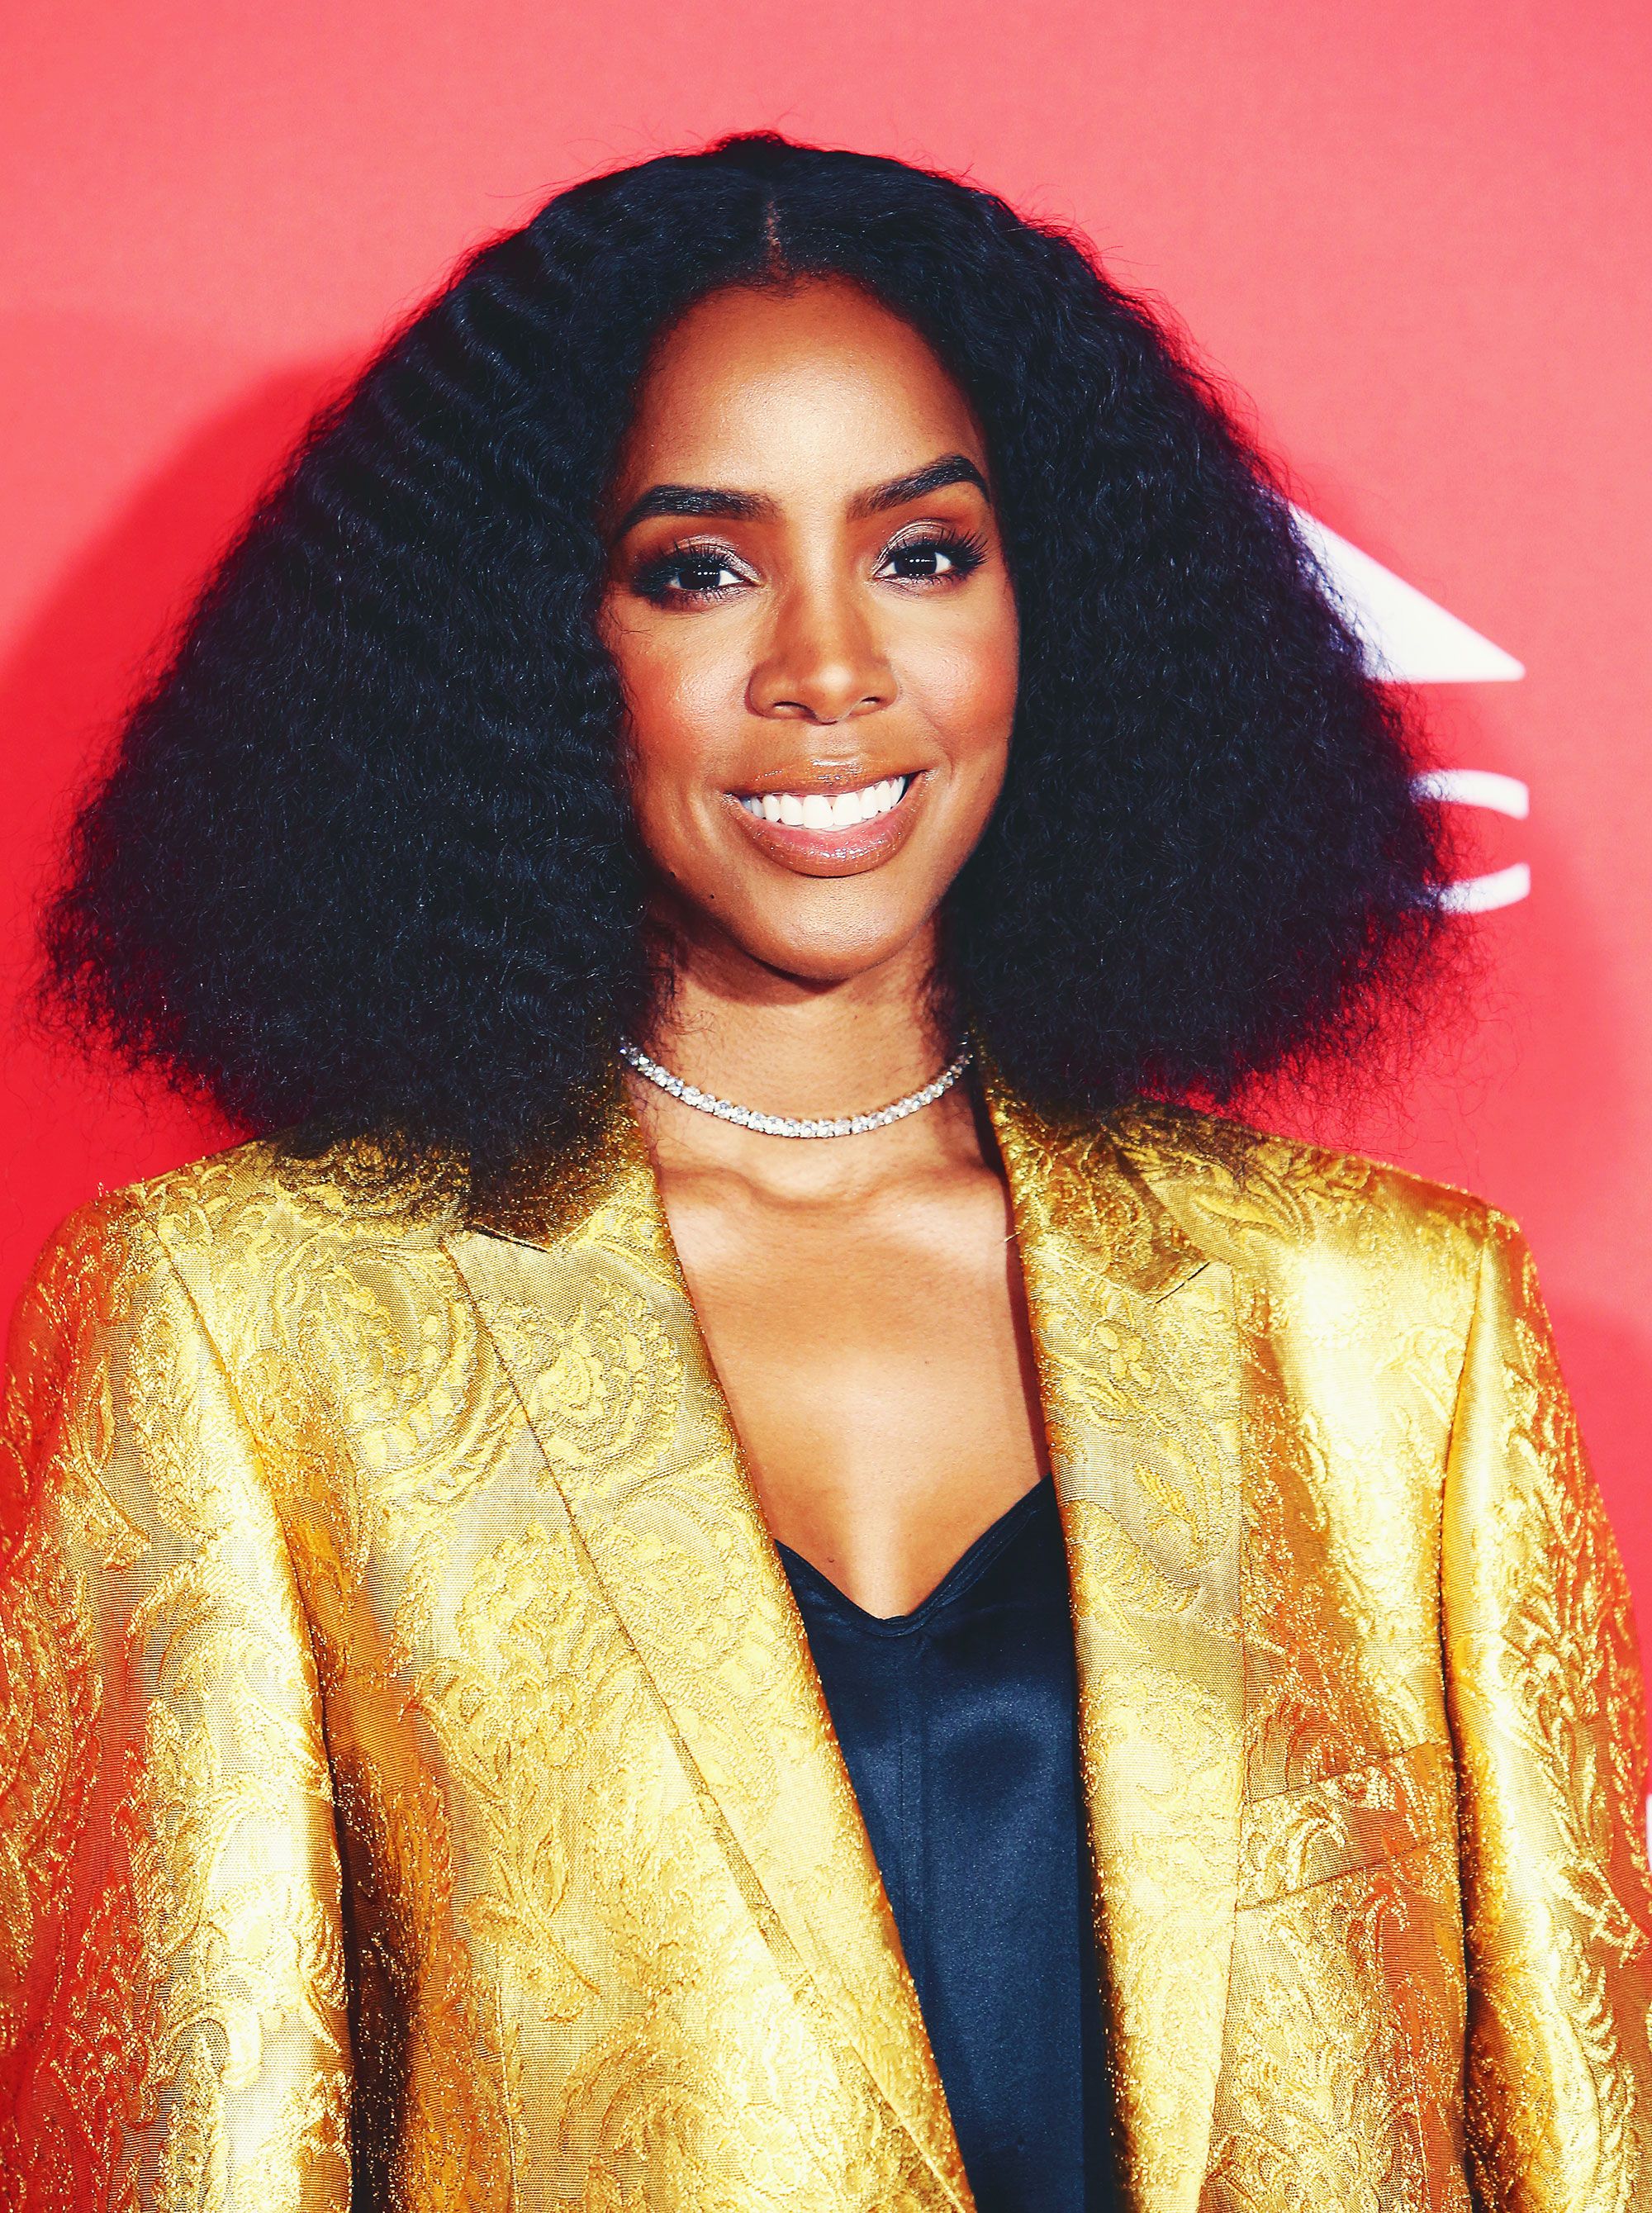 Kelly Rowland's Hairstyles & Hair Colors